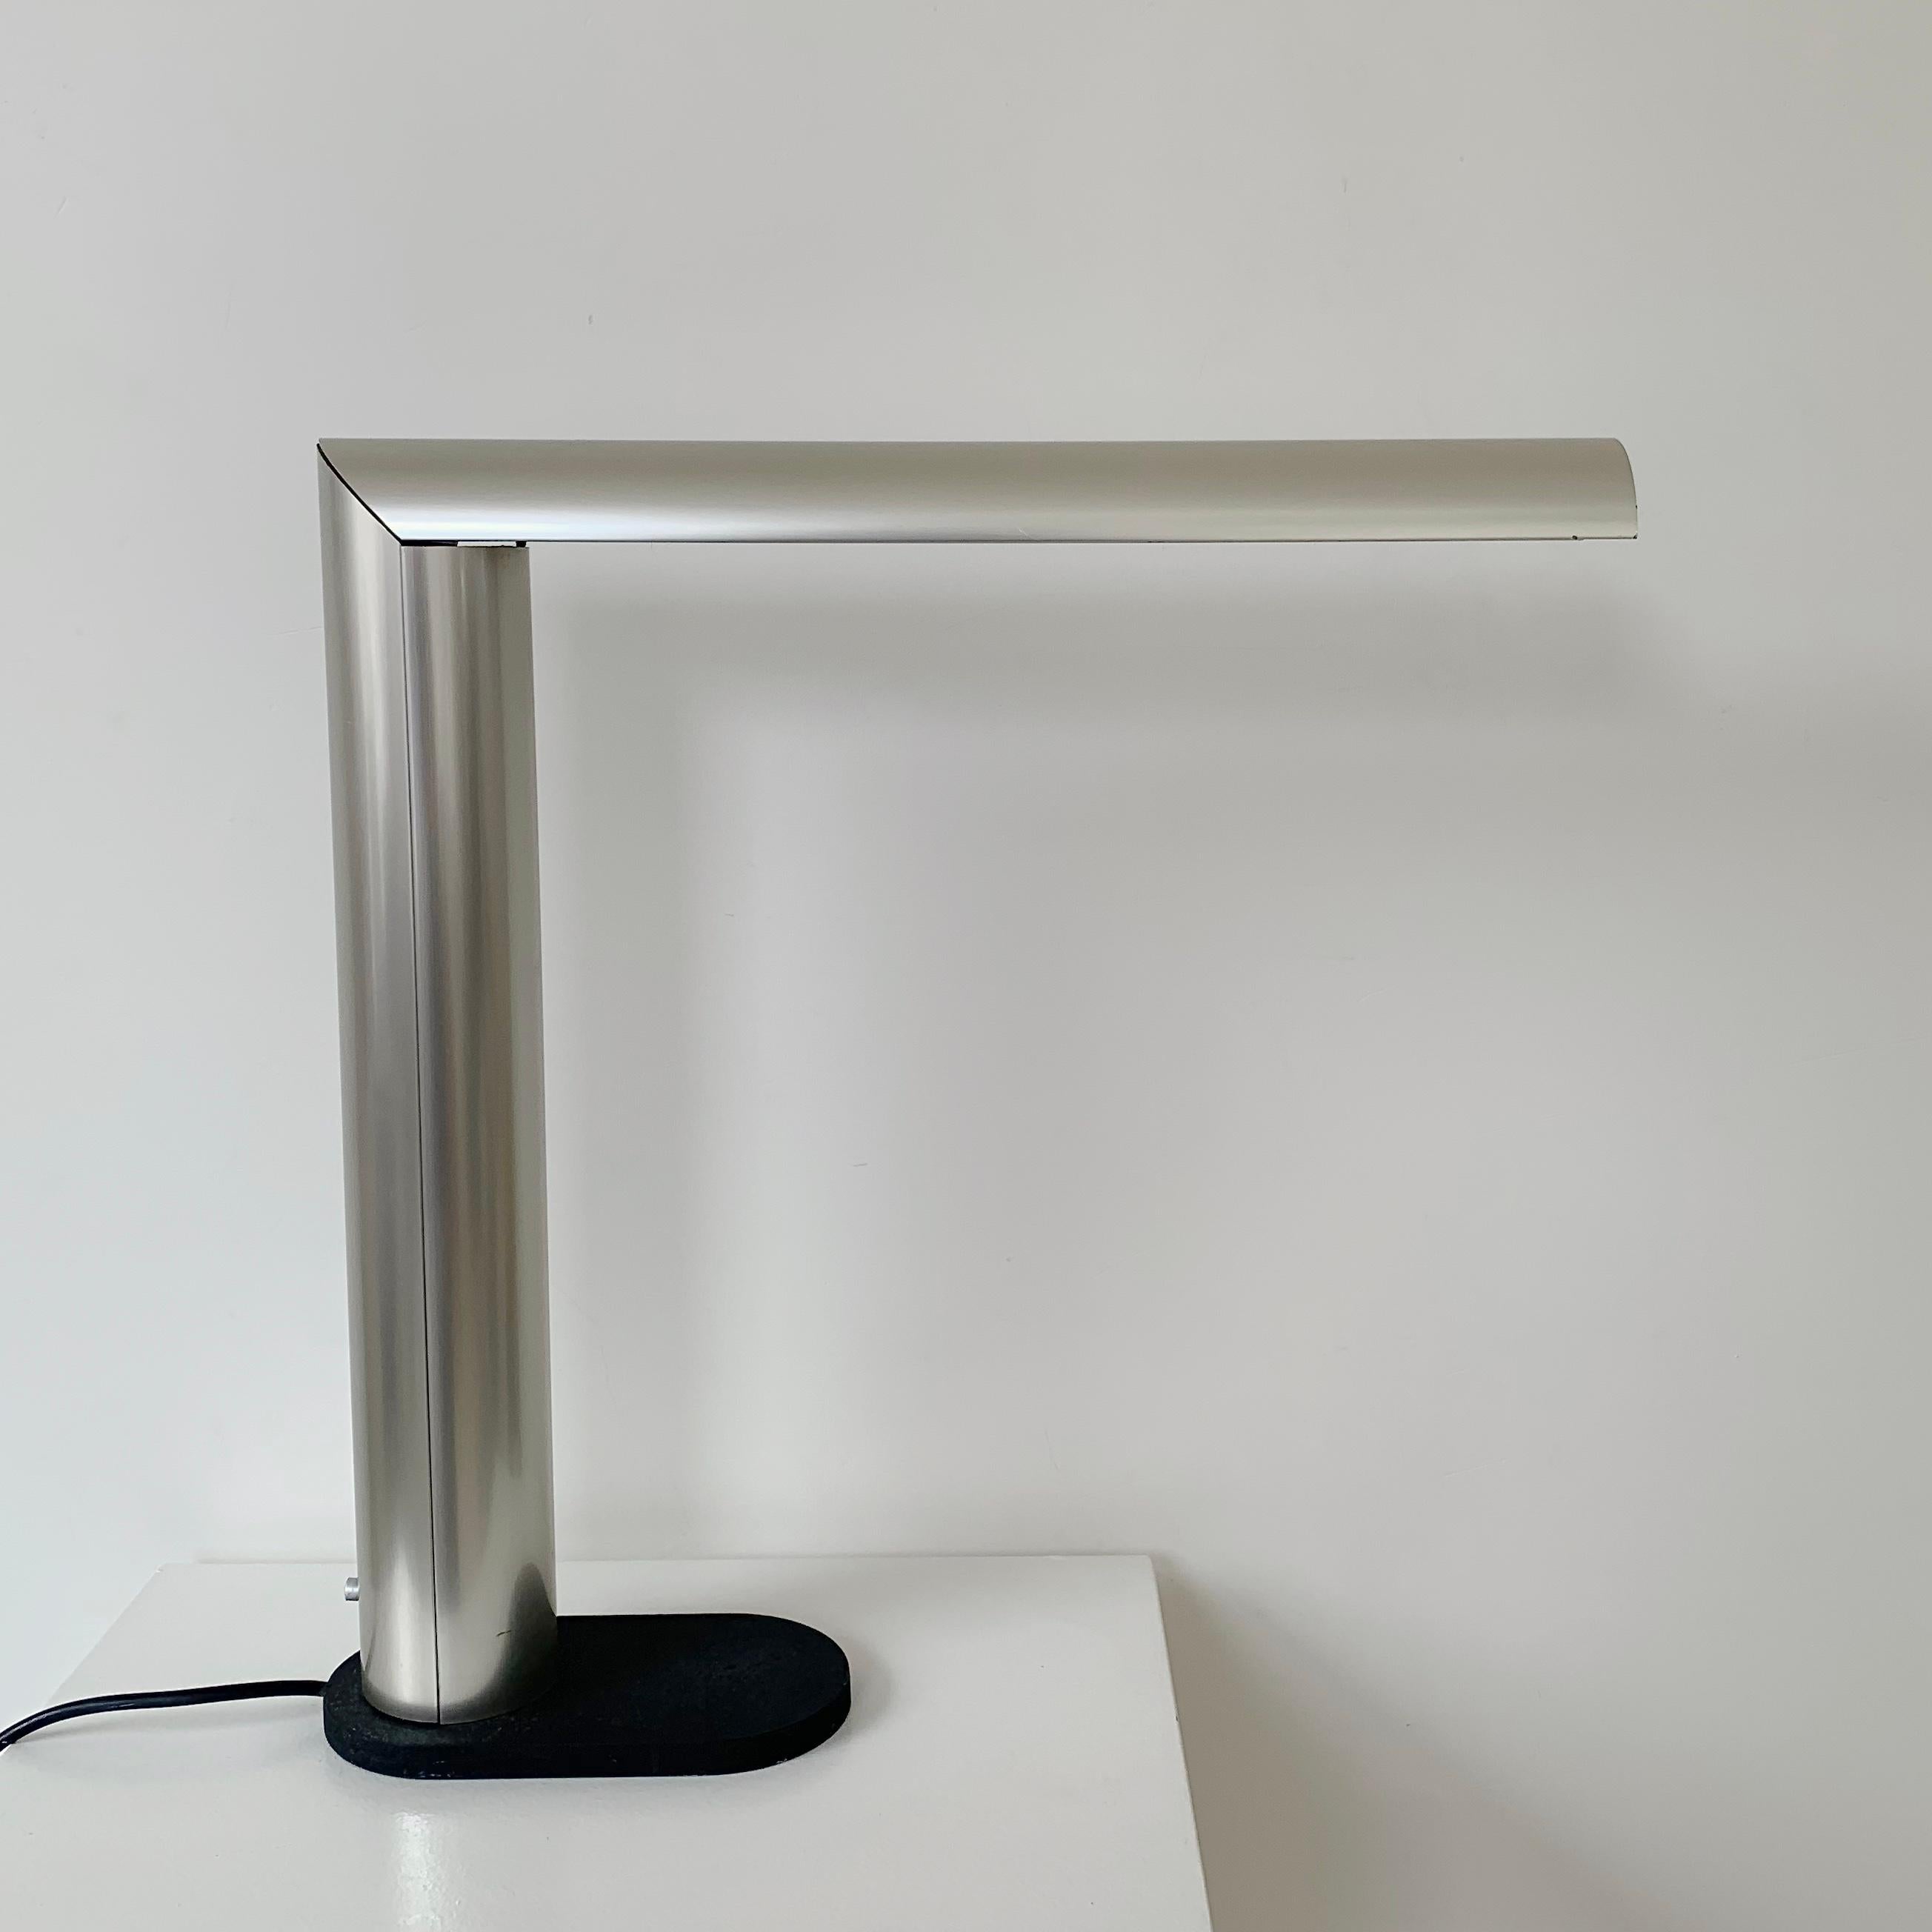 French Sabine Charoy Desk Lamp, Edition Verre Lumiere, 1981, France For Sale